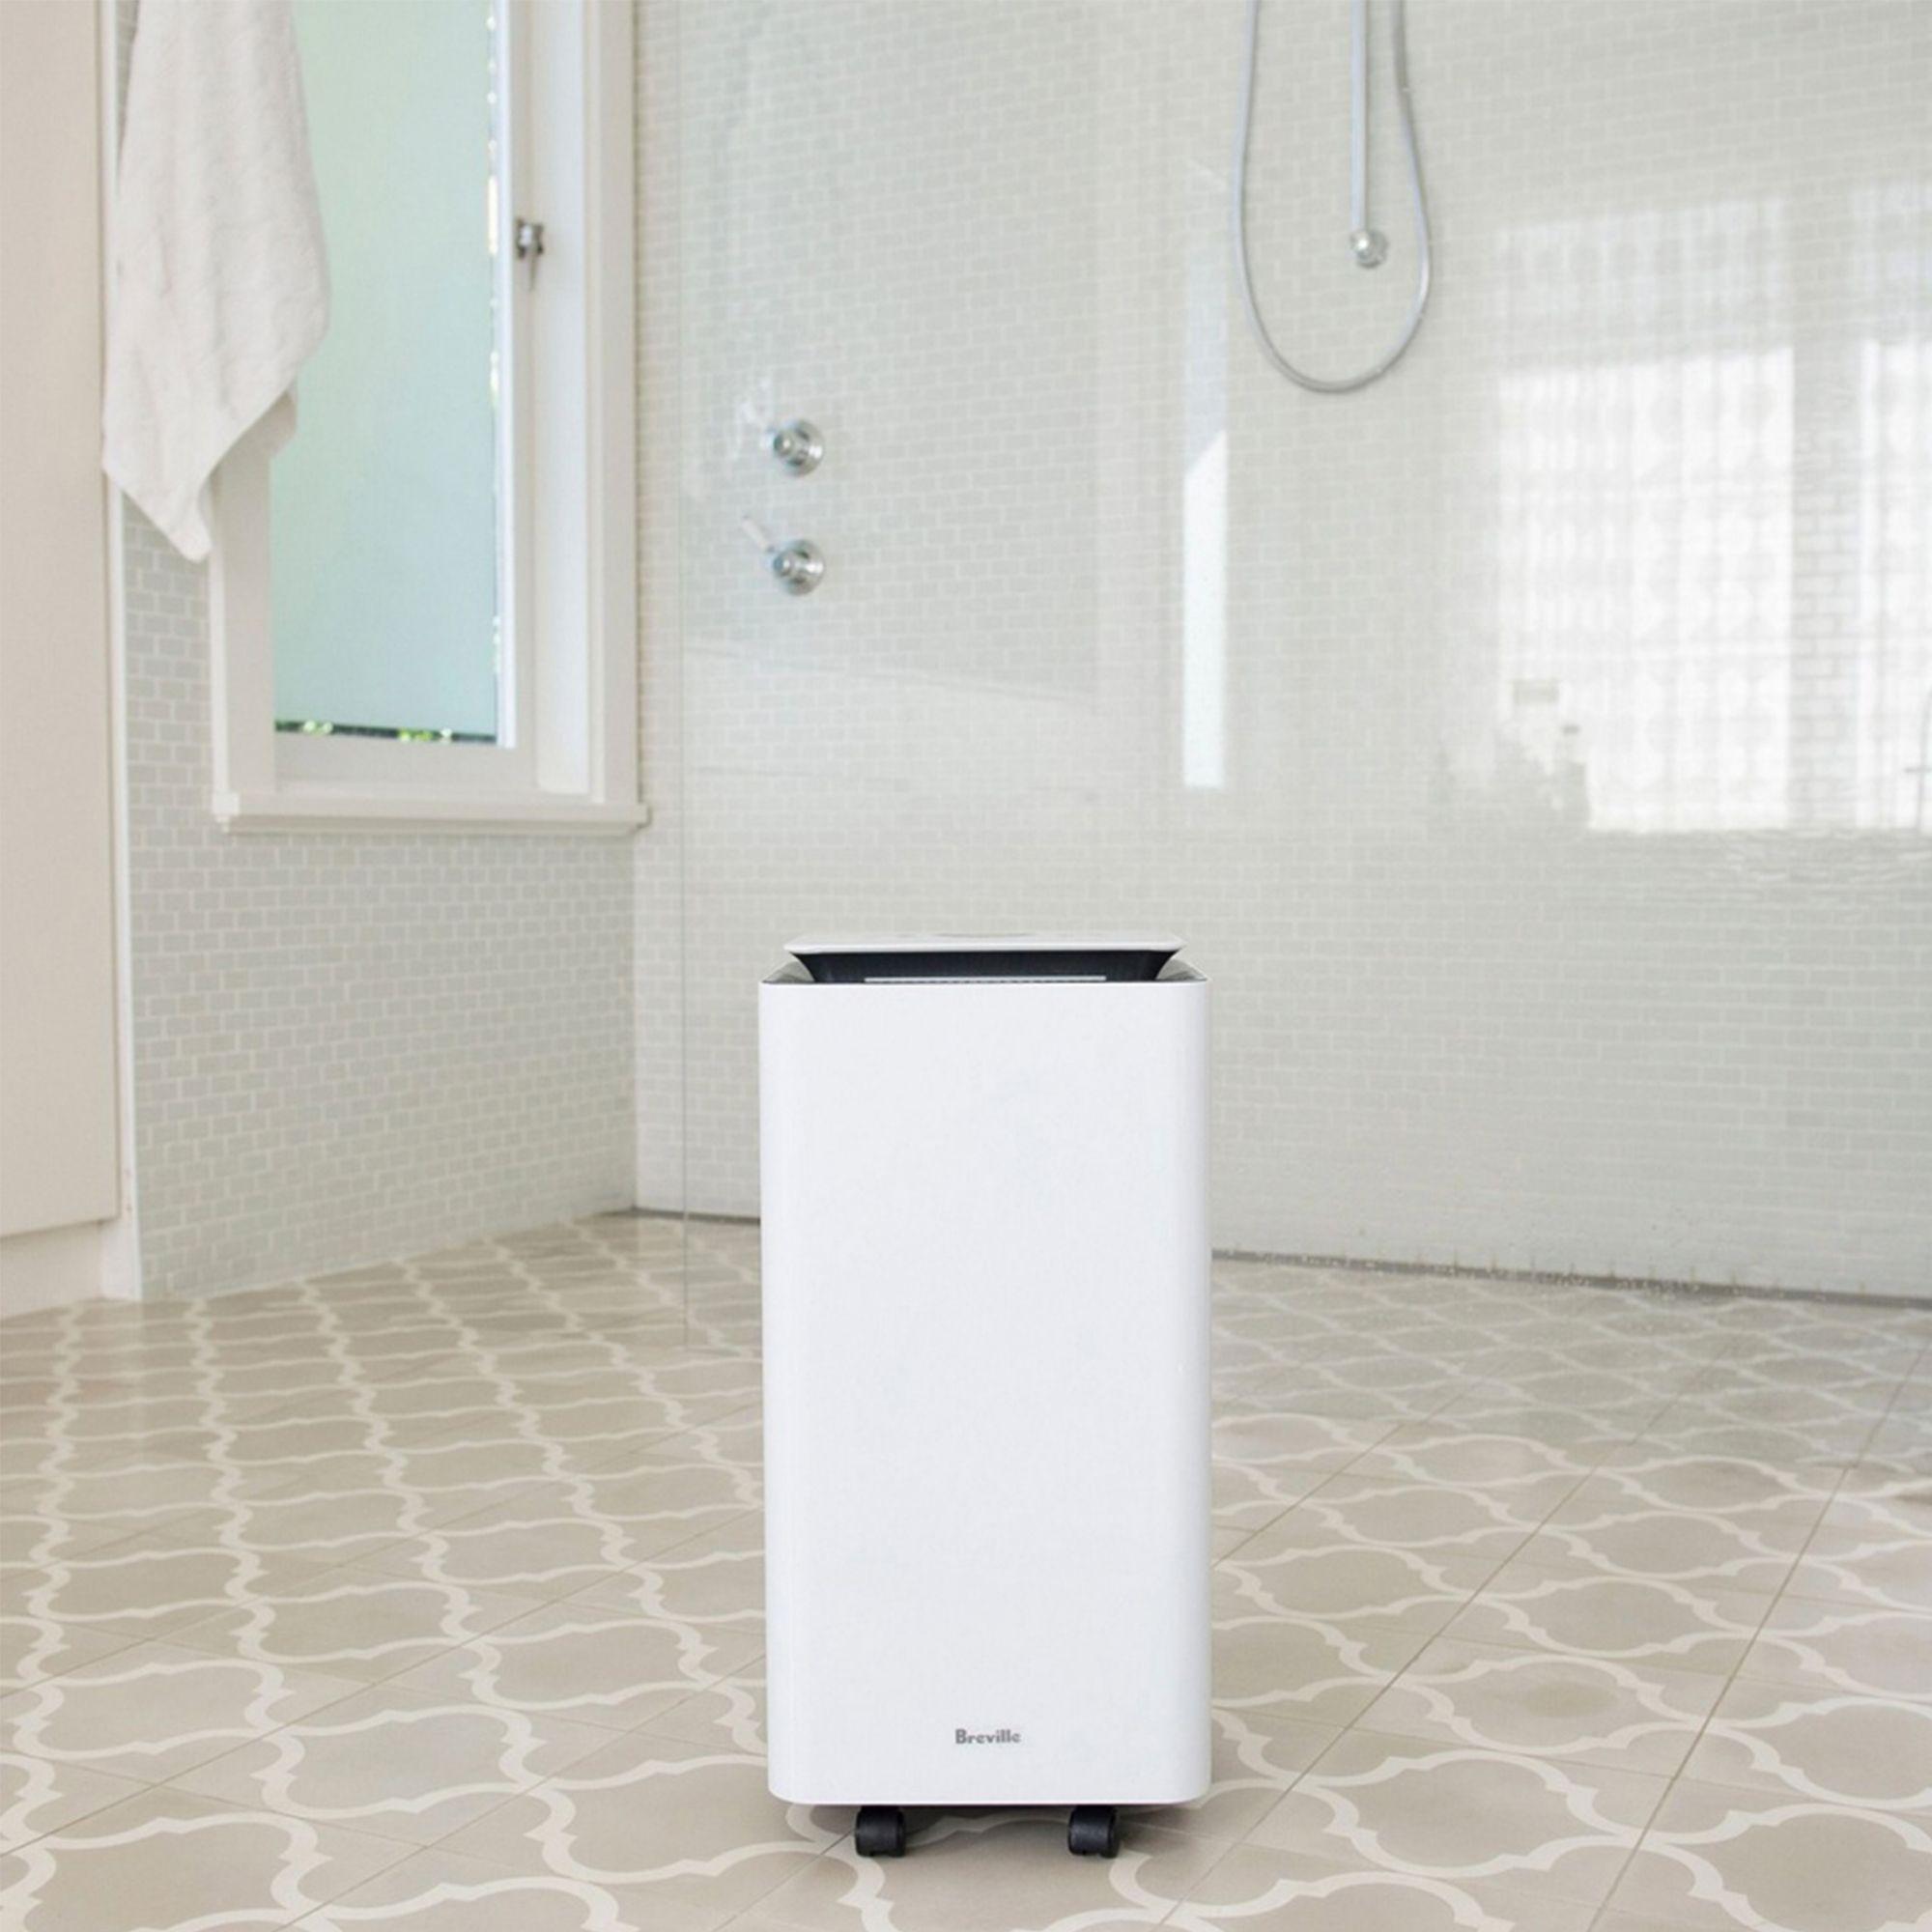 Breville The Smart Dry Dehumidifier Image 2